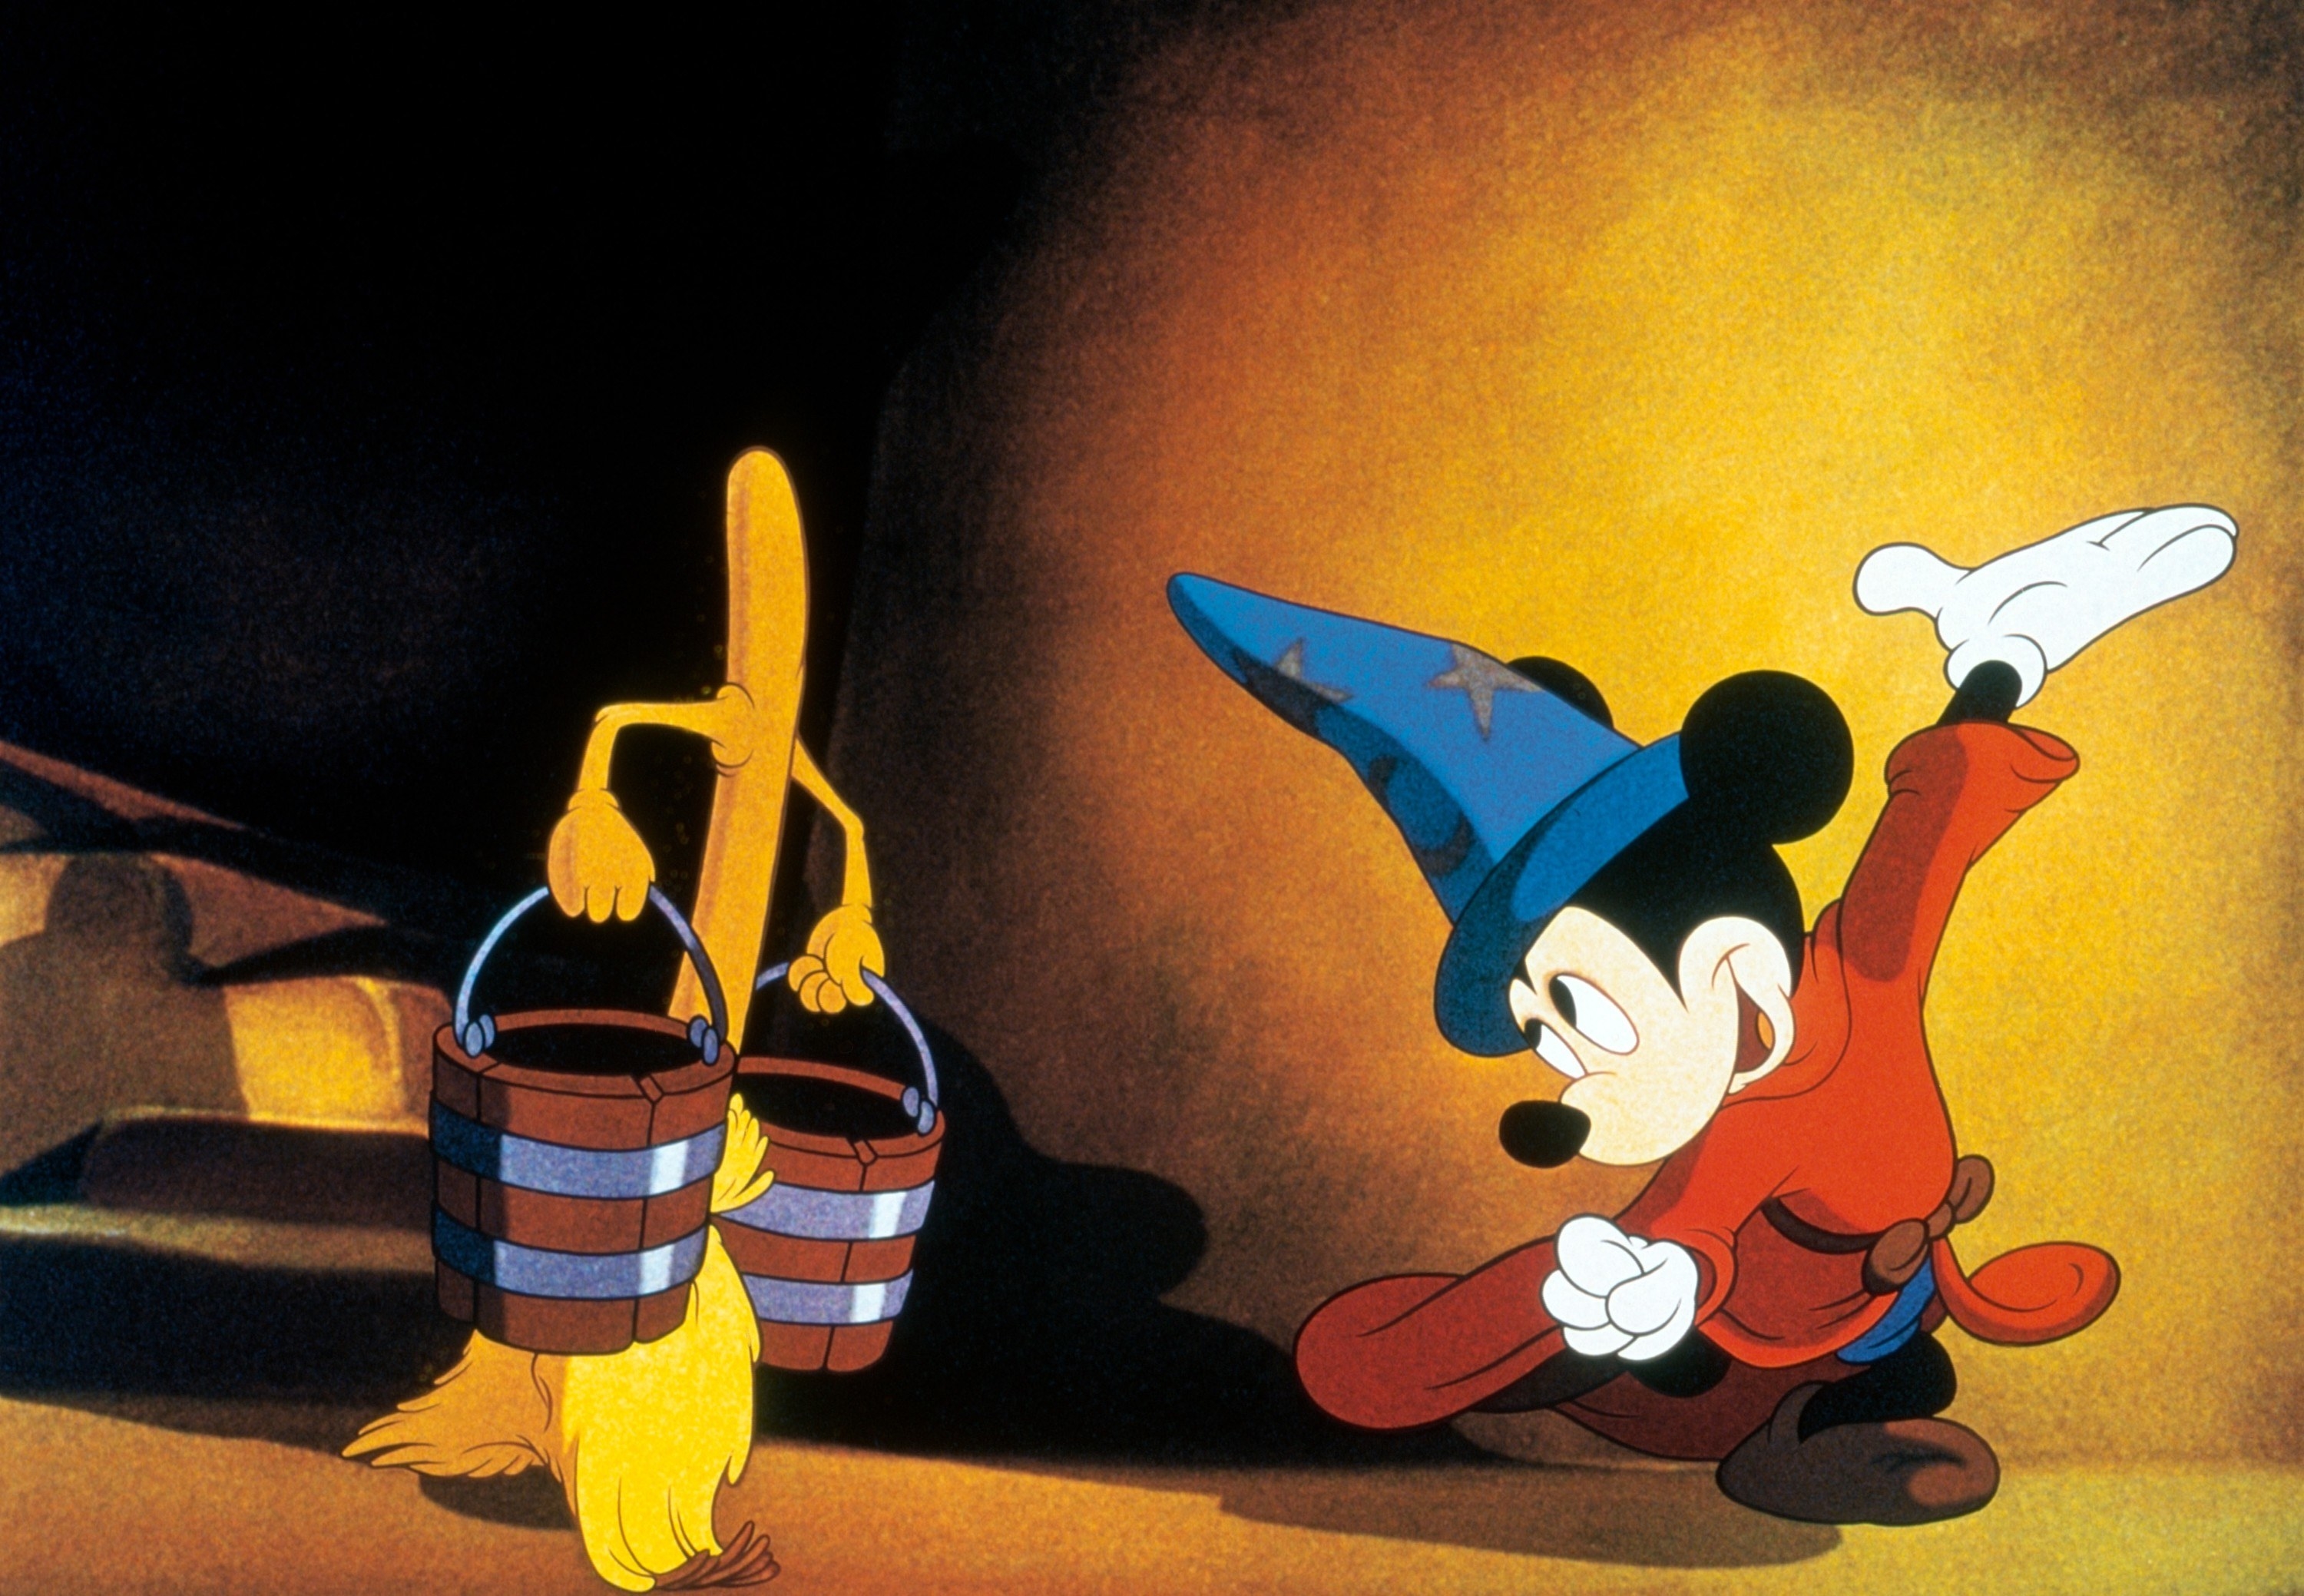 Mickey interacting with an animated broom holding buckets